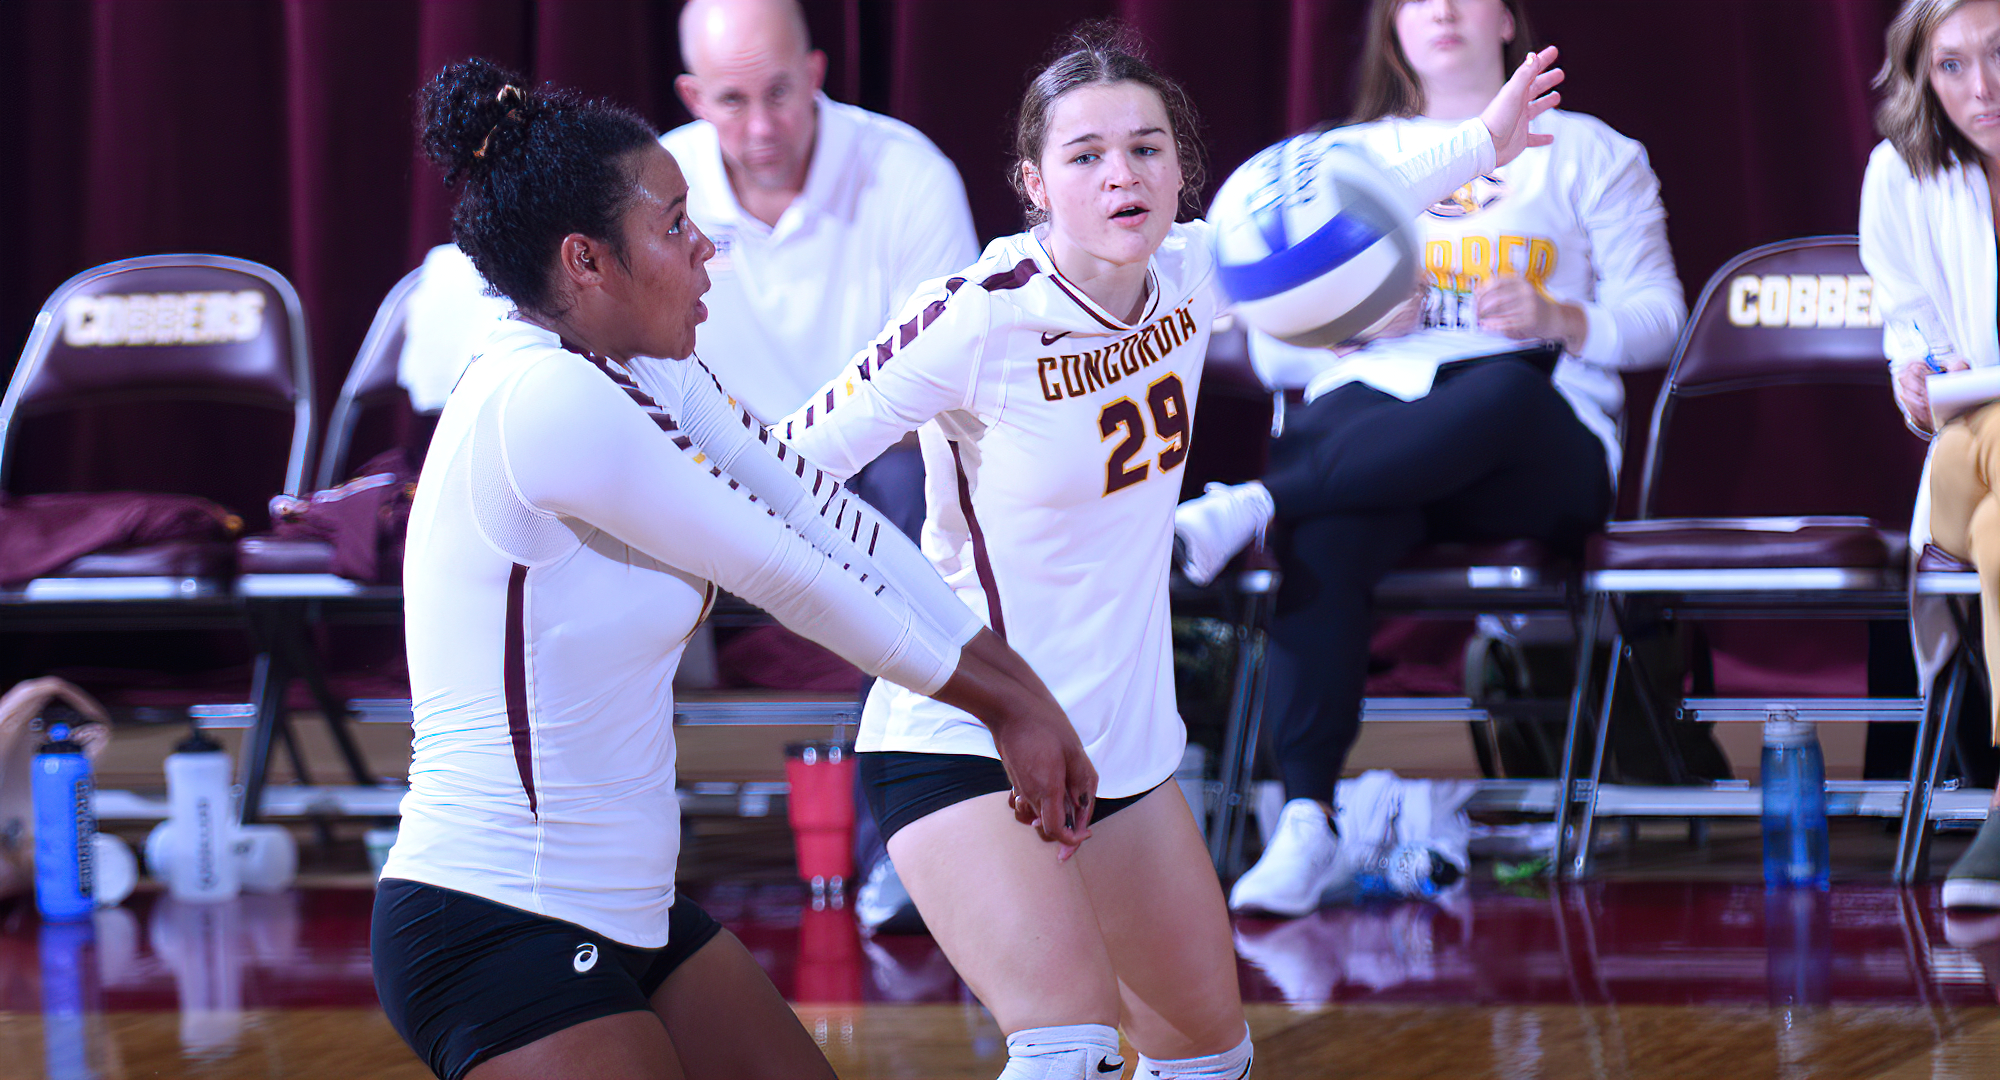 Senior Anna Brakke had a team-high 27 kills and added 43 digs in the Cobbers' three matches at the Wartburg Invite.